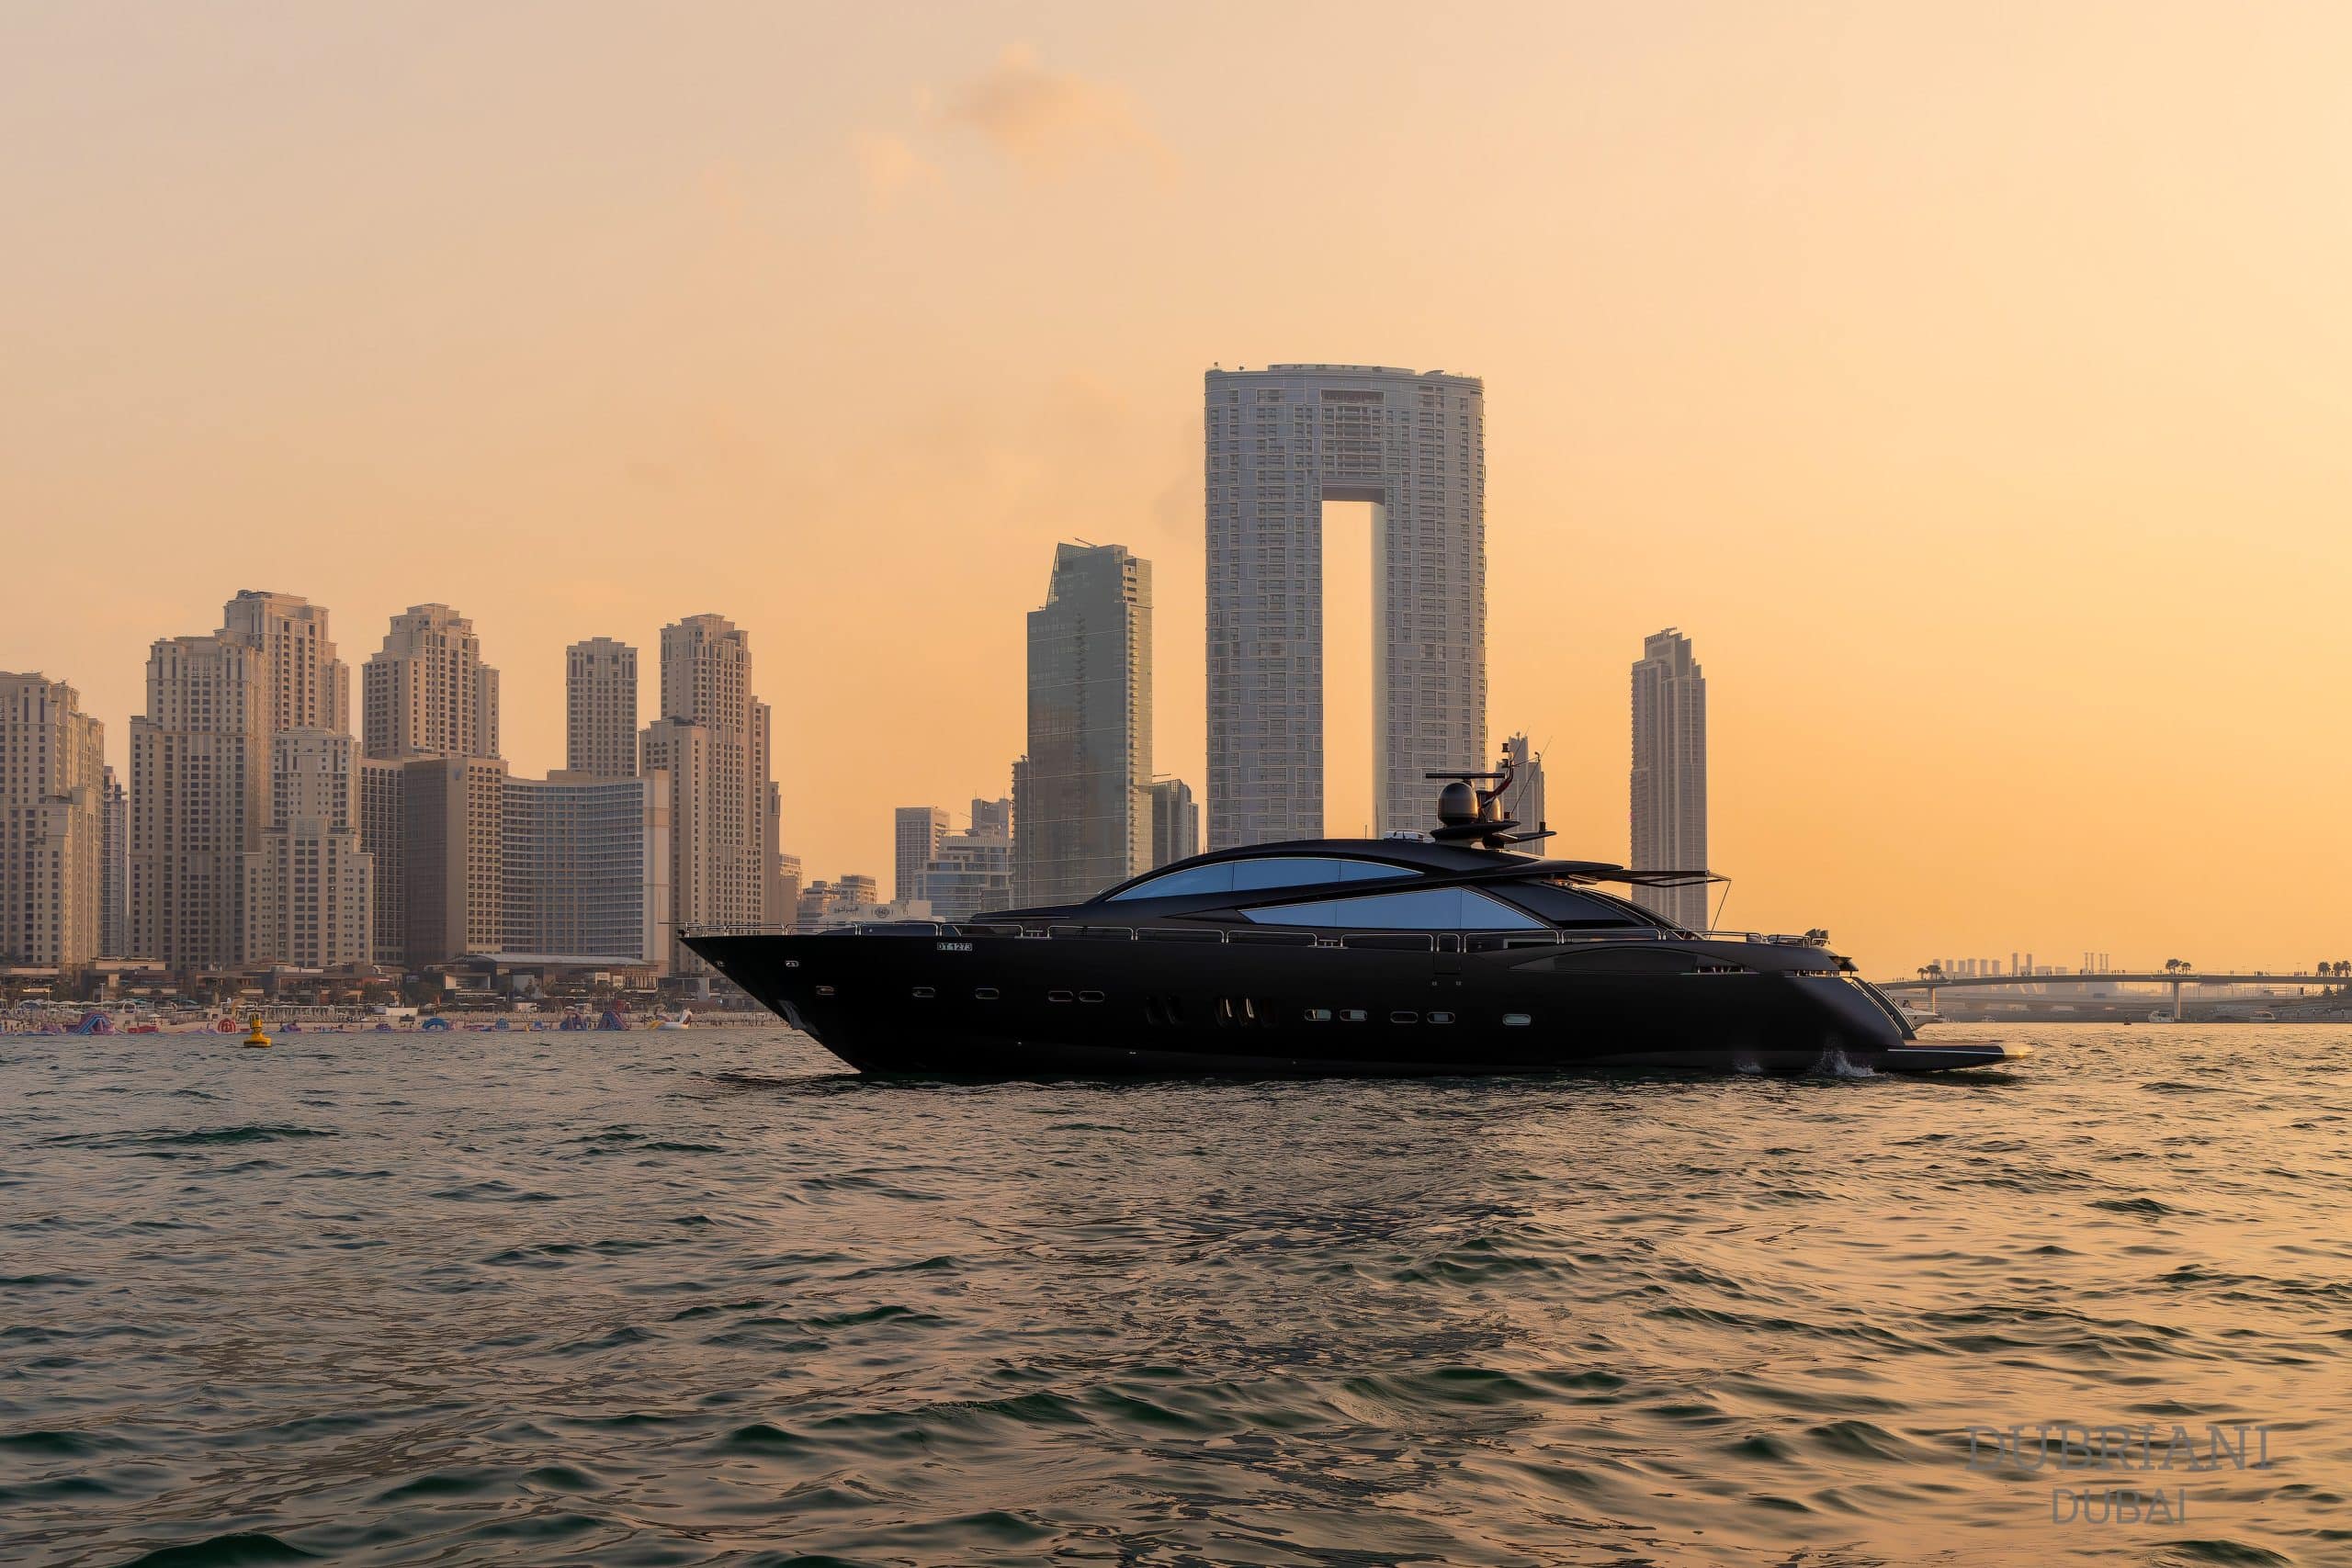 Cruise in style aboard this black yacht, the Sunseeker 108 Predator.